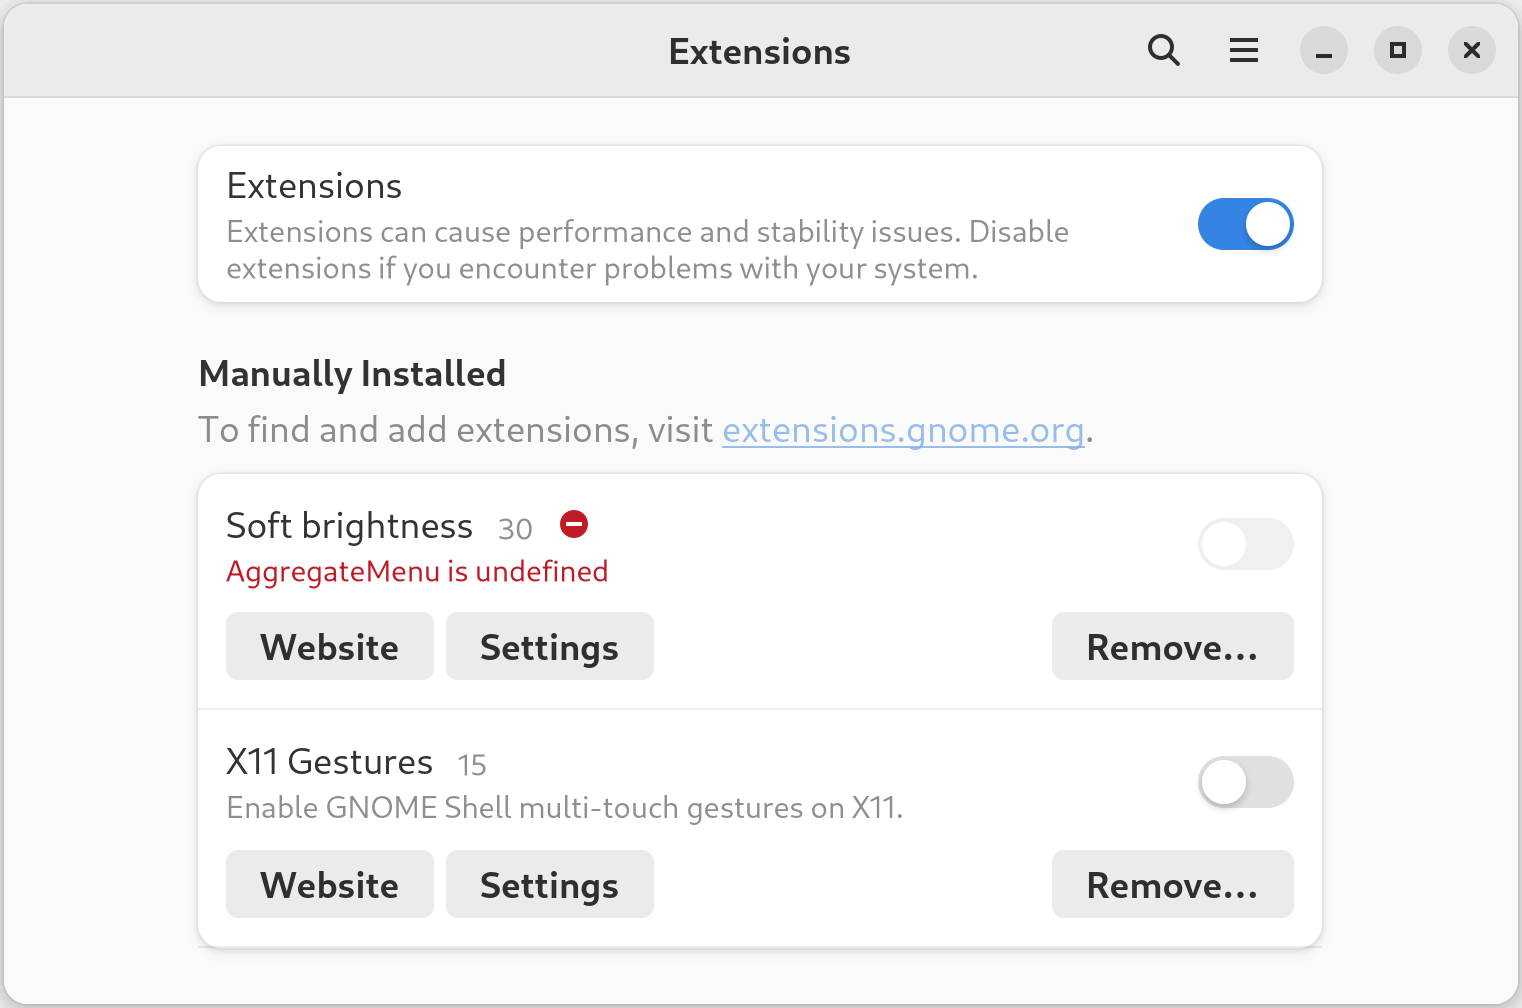 Soft Brightness extension encounters an error when enabled